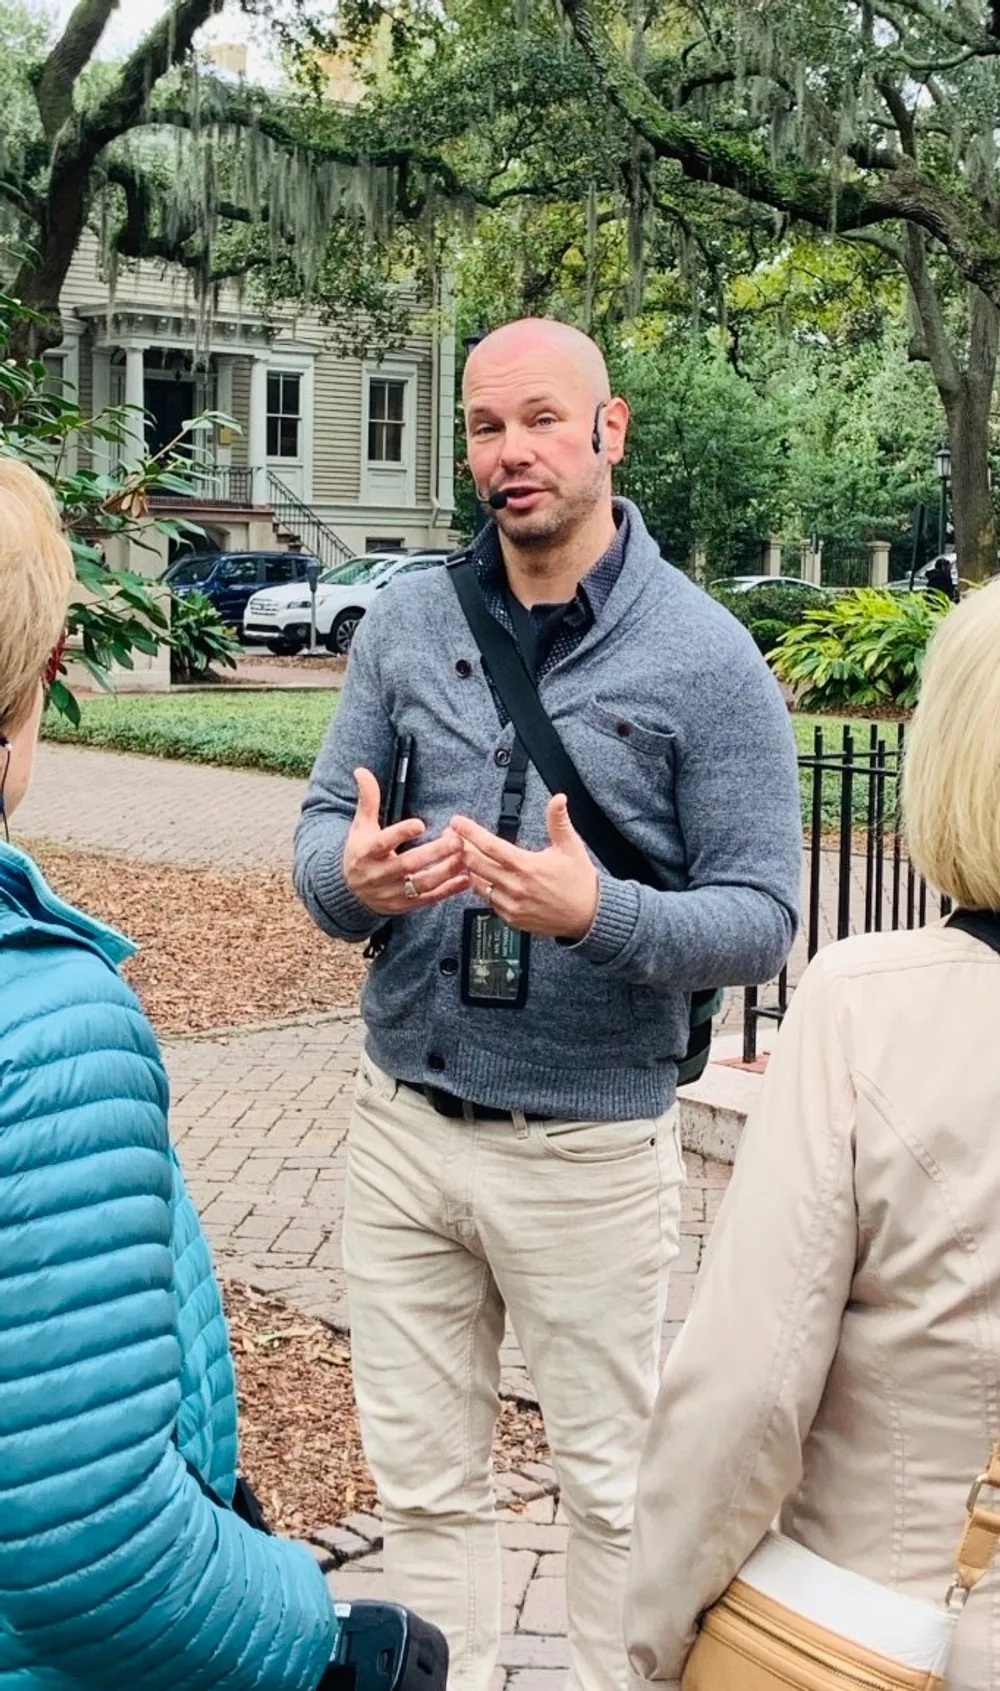 A man with a headset is speaking and gesturing with his hands possibly giving a tour with listeners facing him and a backdrop of trees and historic architecture